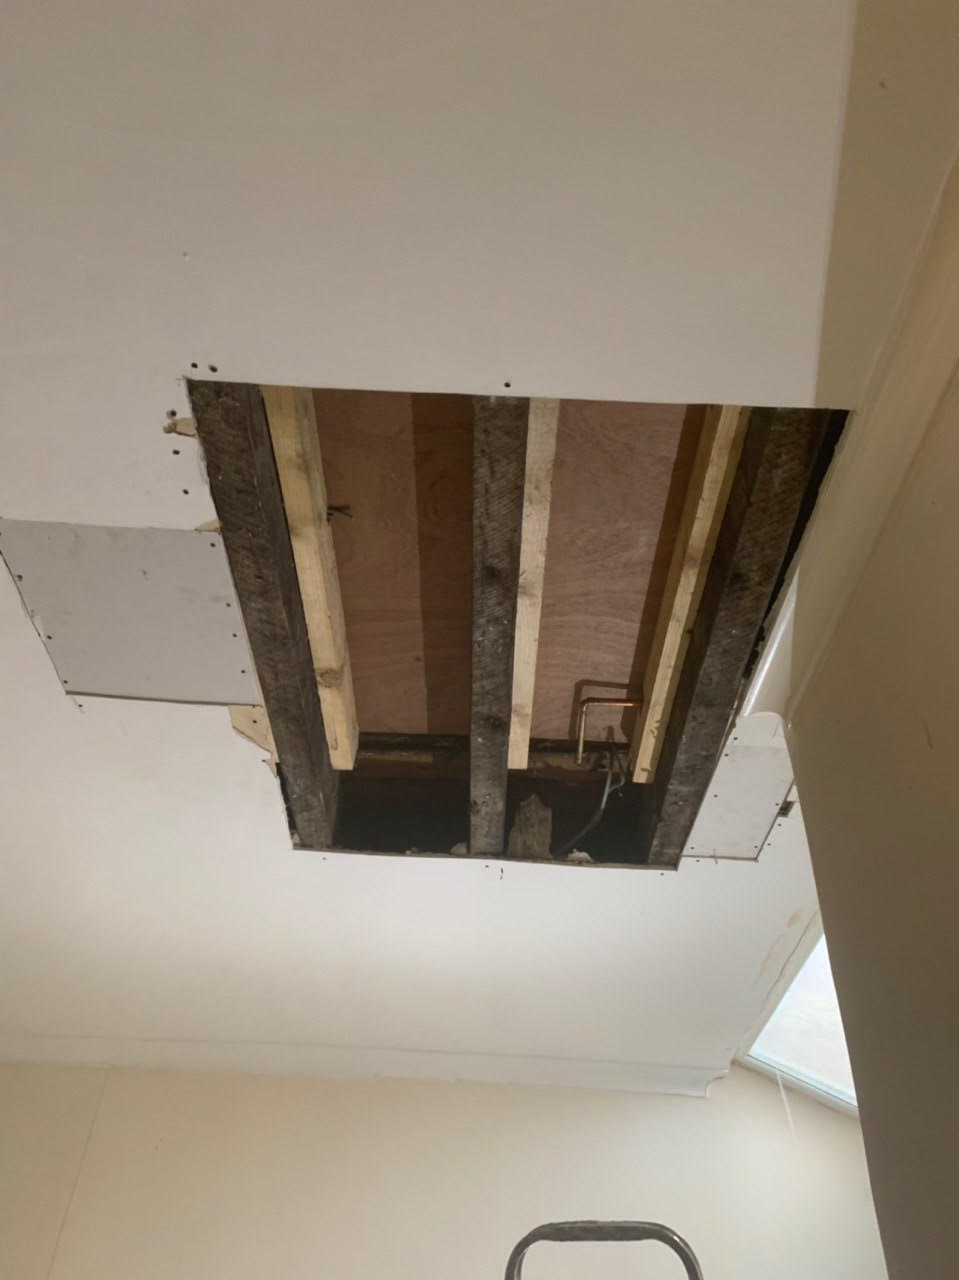 Water damaged ceiling due to a leak 4